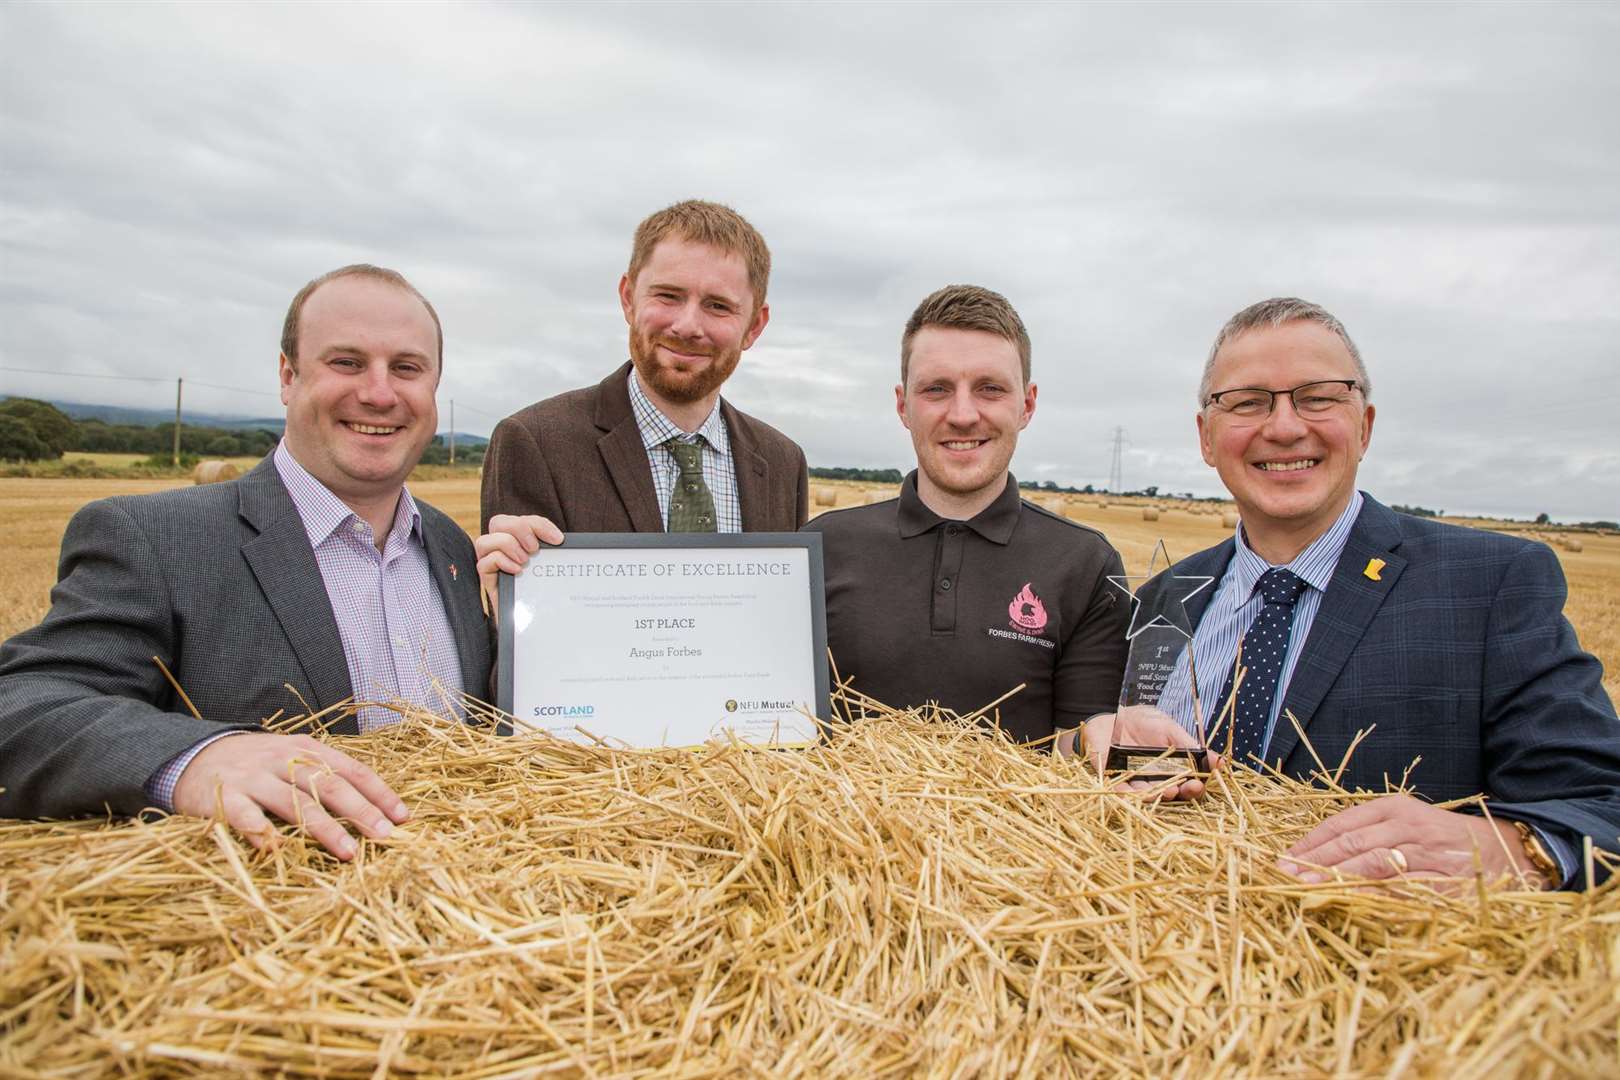 Scotland Food & Drink/NFU Mutual – Inspirational Young Person Award 2019 Gus Forbes receives his award from Jonny Hogg, Agent at NFU Mutual and Brian Lochhead, Sales Manager at NFU Mutual also pictured (left) Gary MacDonald, Business Development Manager, Scotland Food & Drink